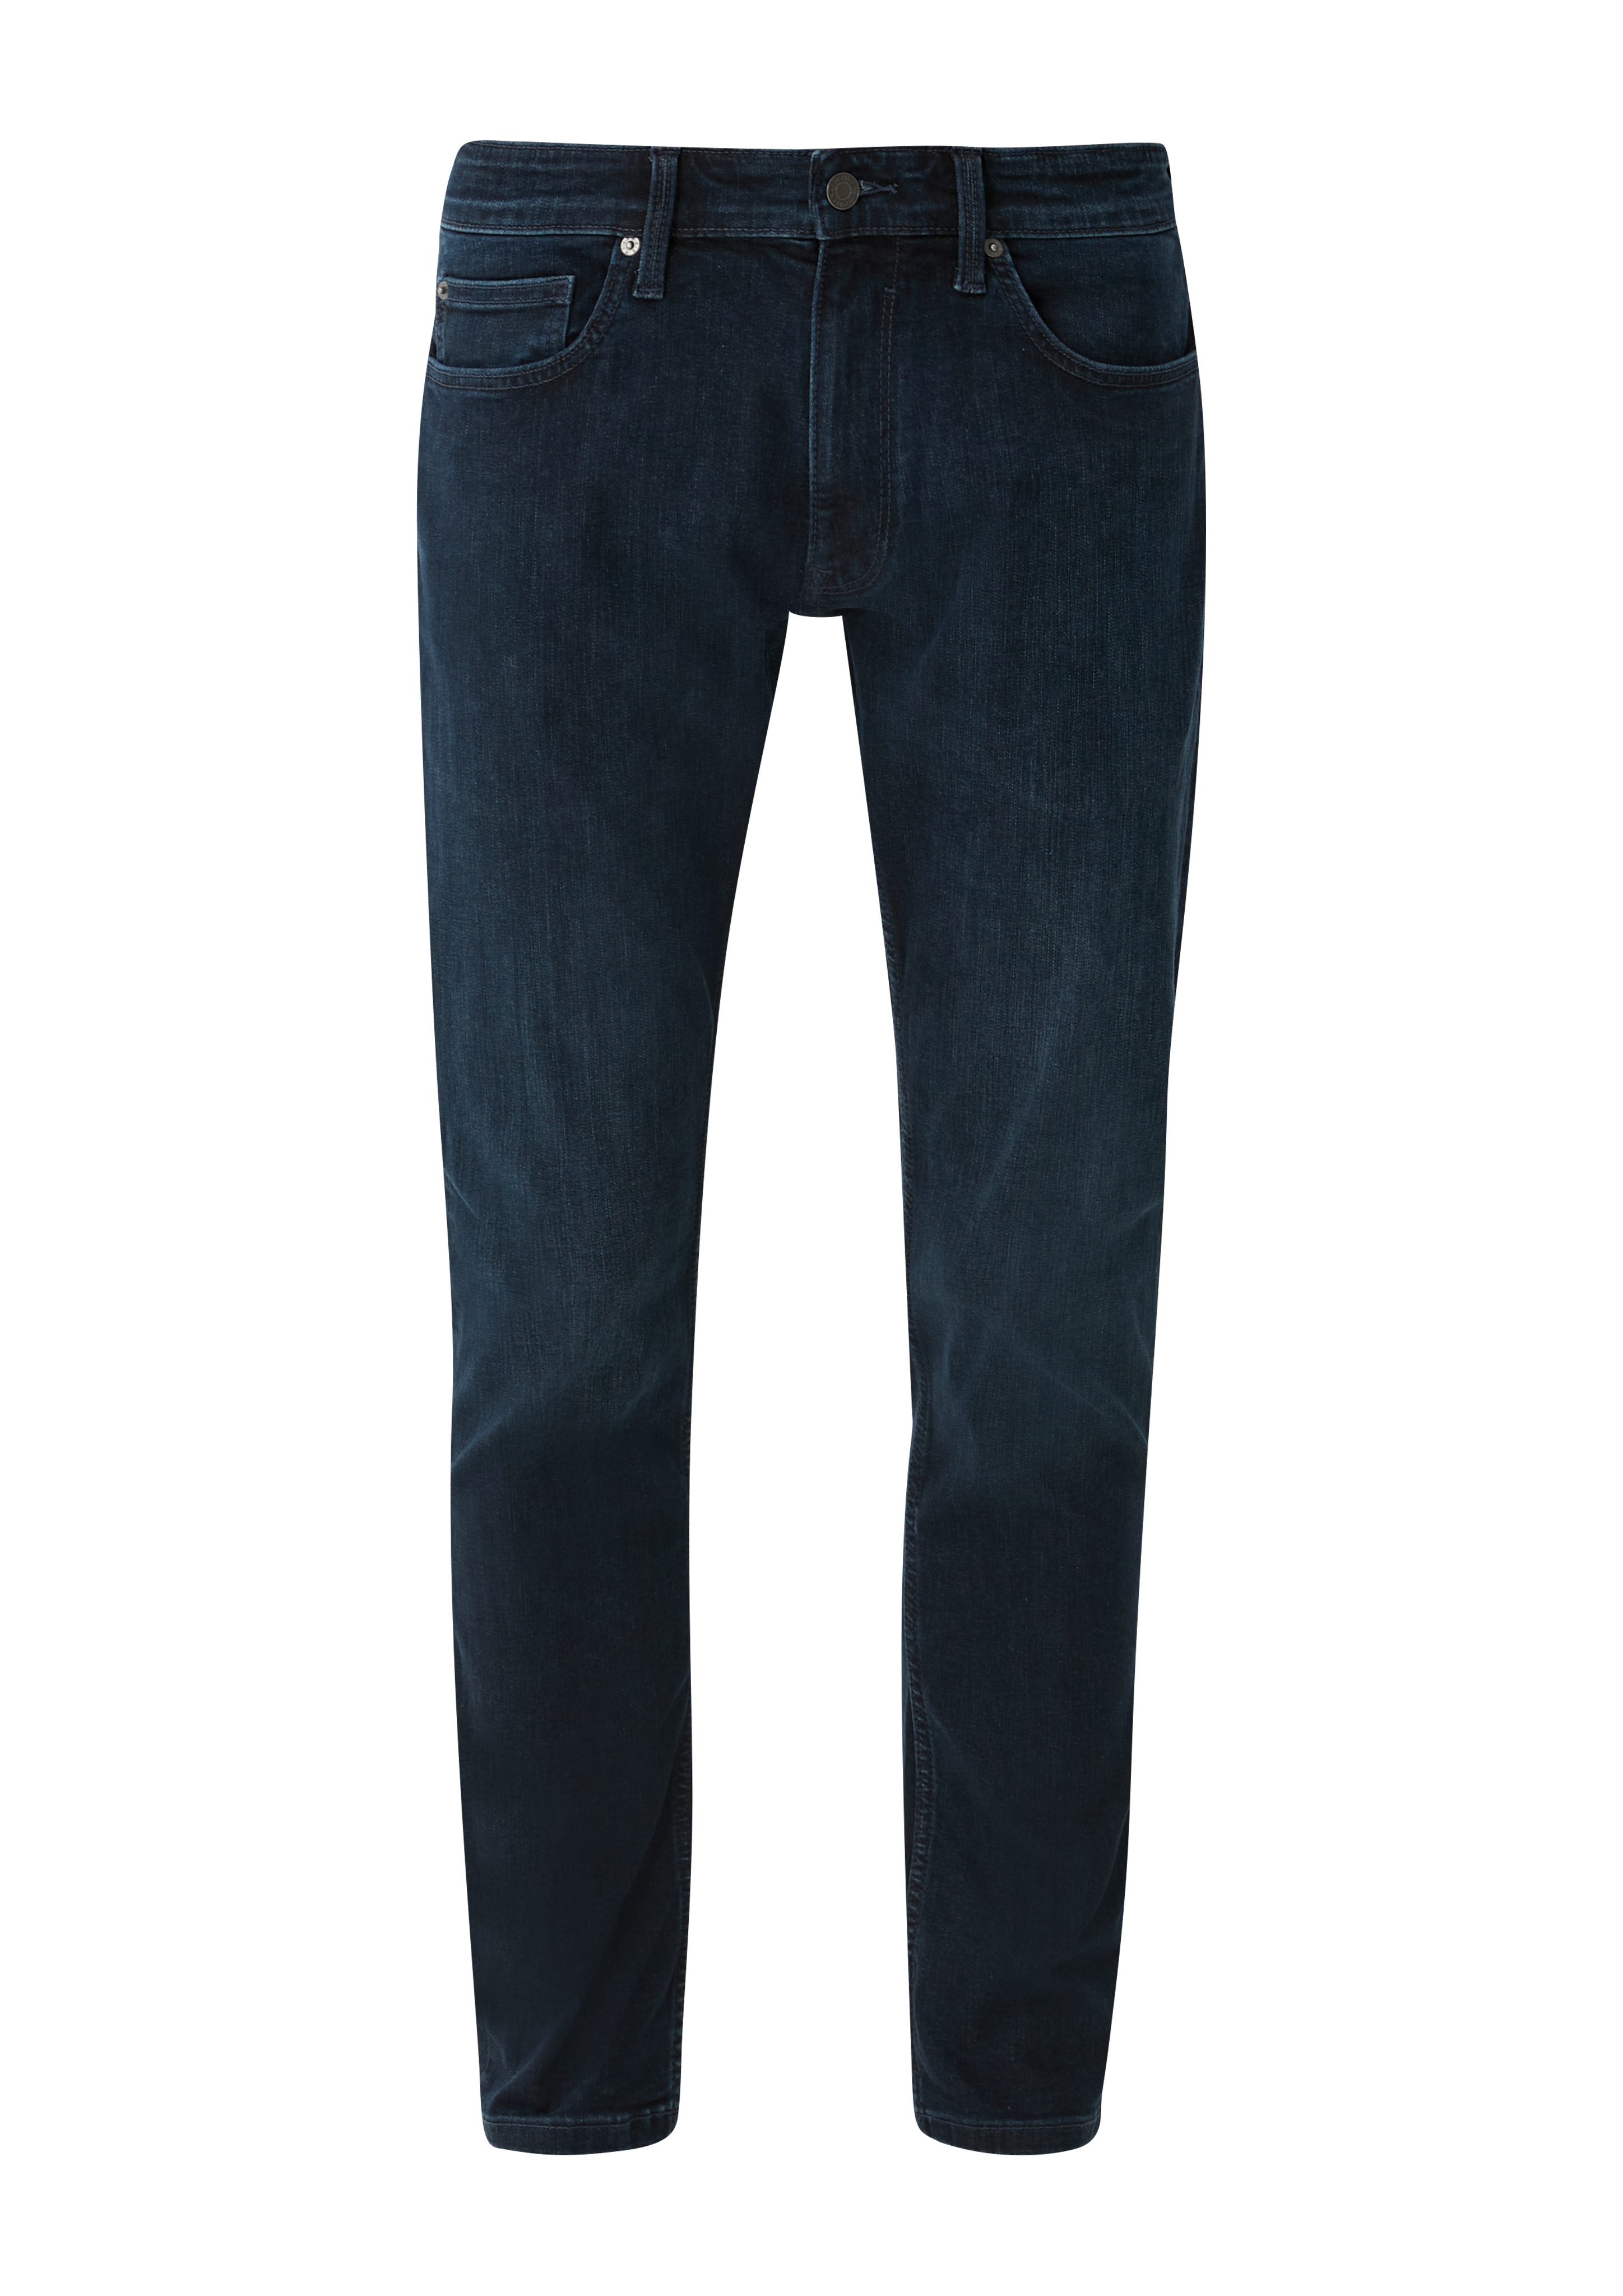 blau Slim Fit / / Mid Jeans Slim: s.Oliver Rise Leg Keith Stoffhose / Waschung